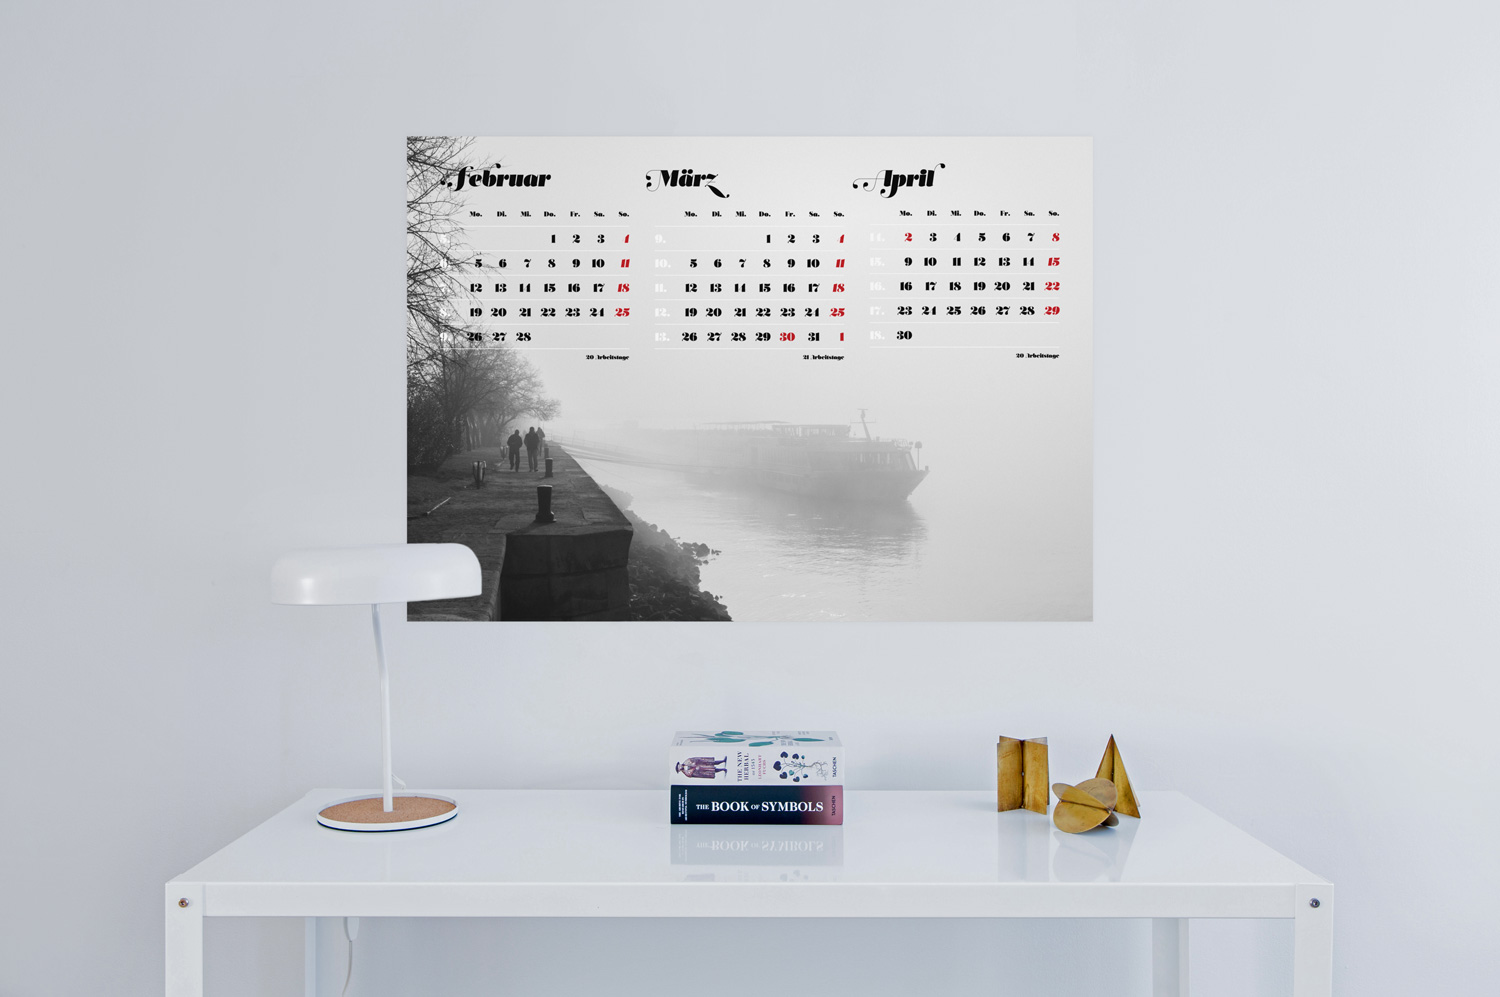 Three months calendar in German language with months lying between each other and the focus on photographs. It was set in two colors in black and red in Acta Poster and includes the number of working days as well as the calendar week